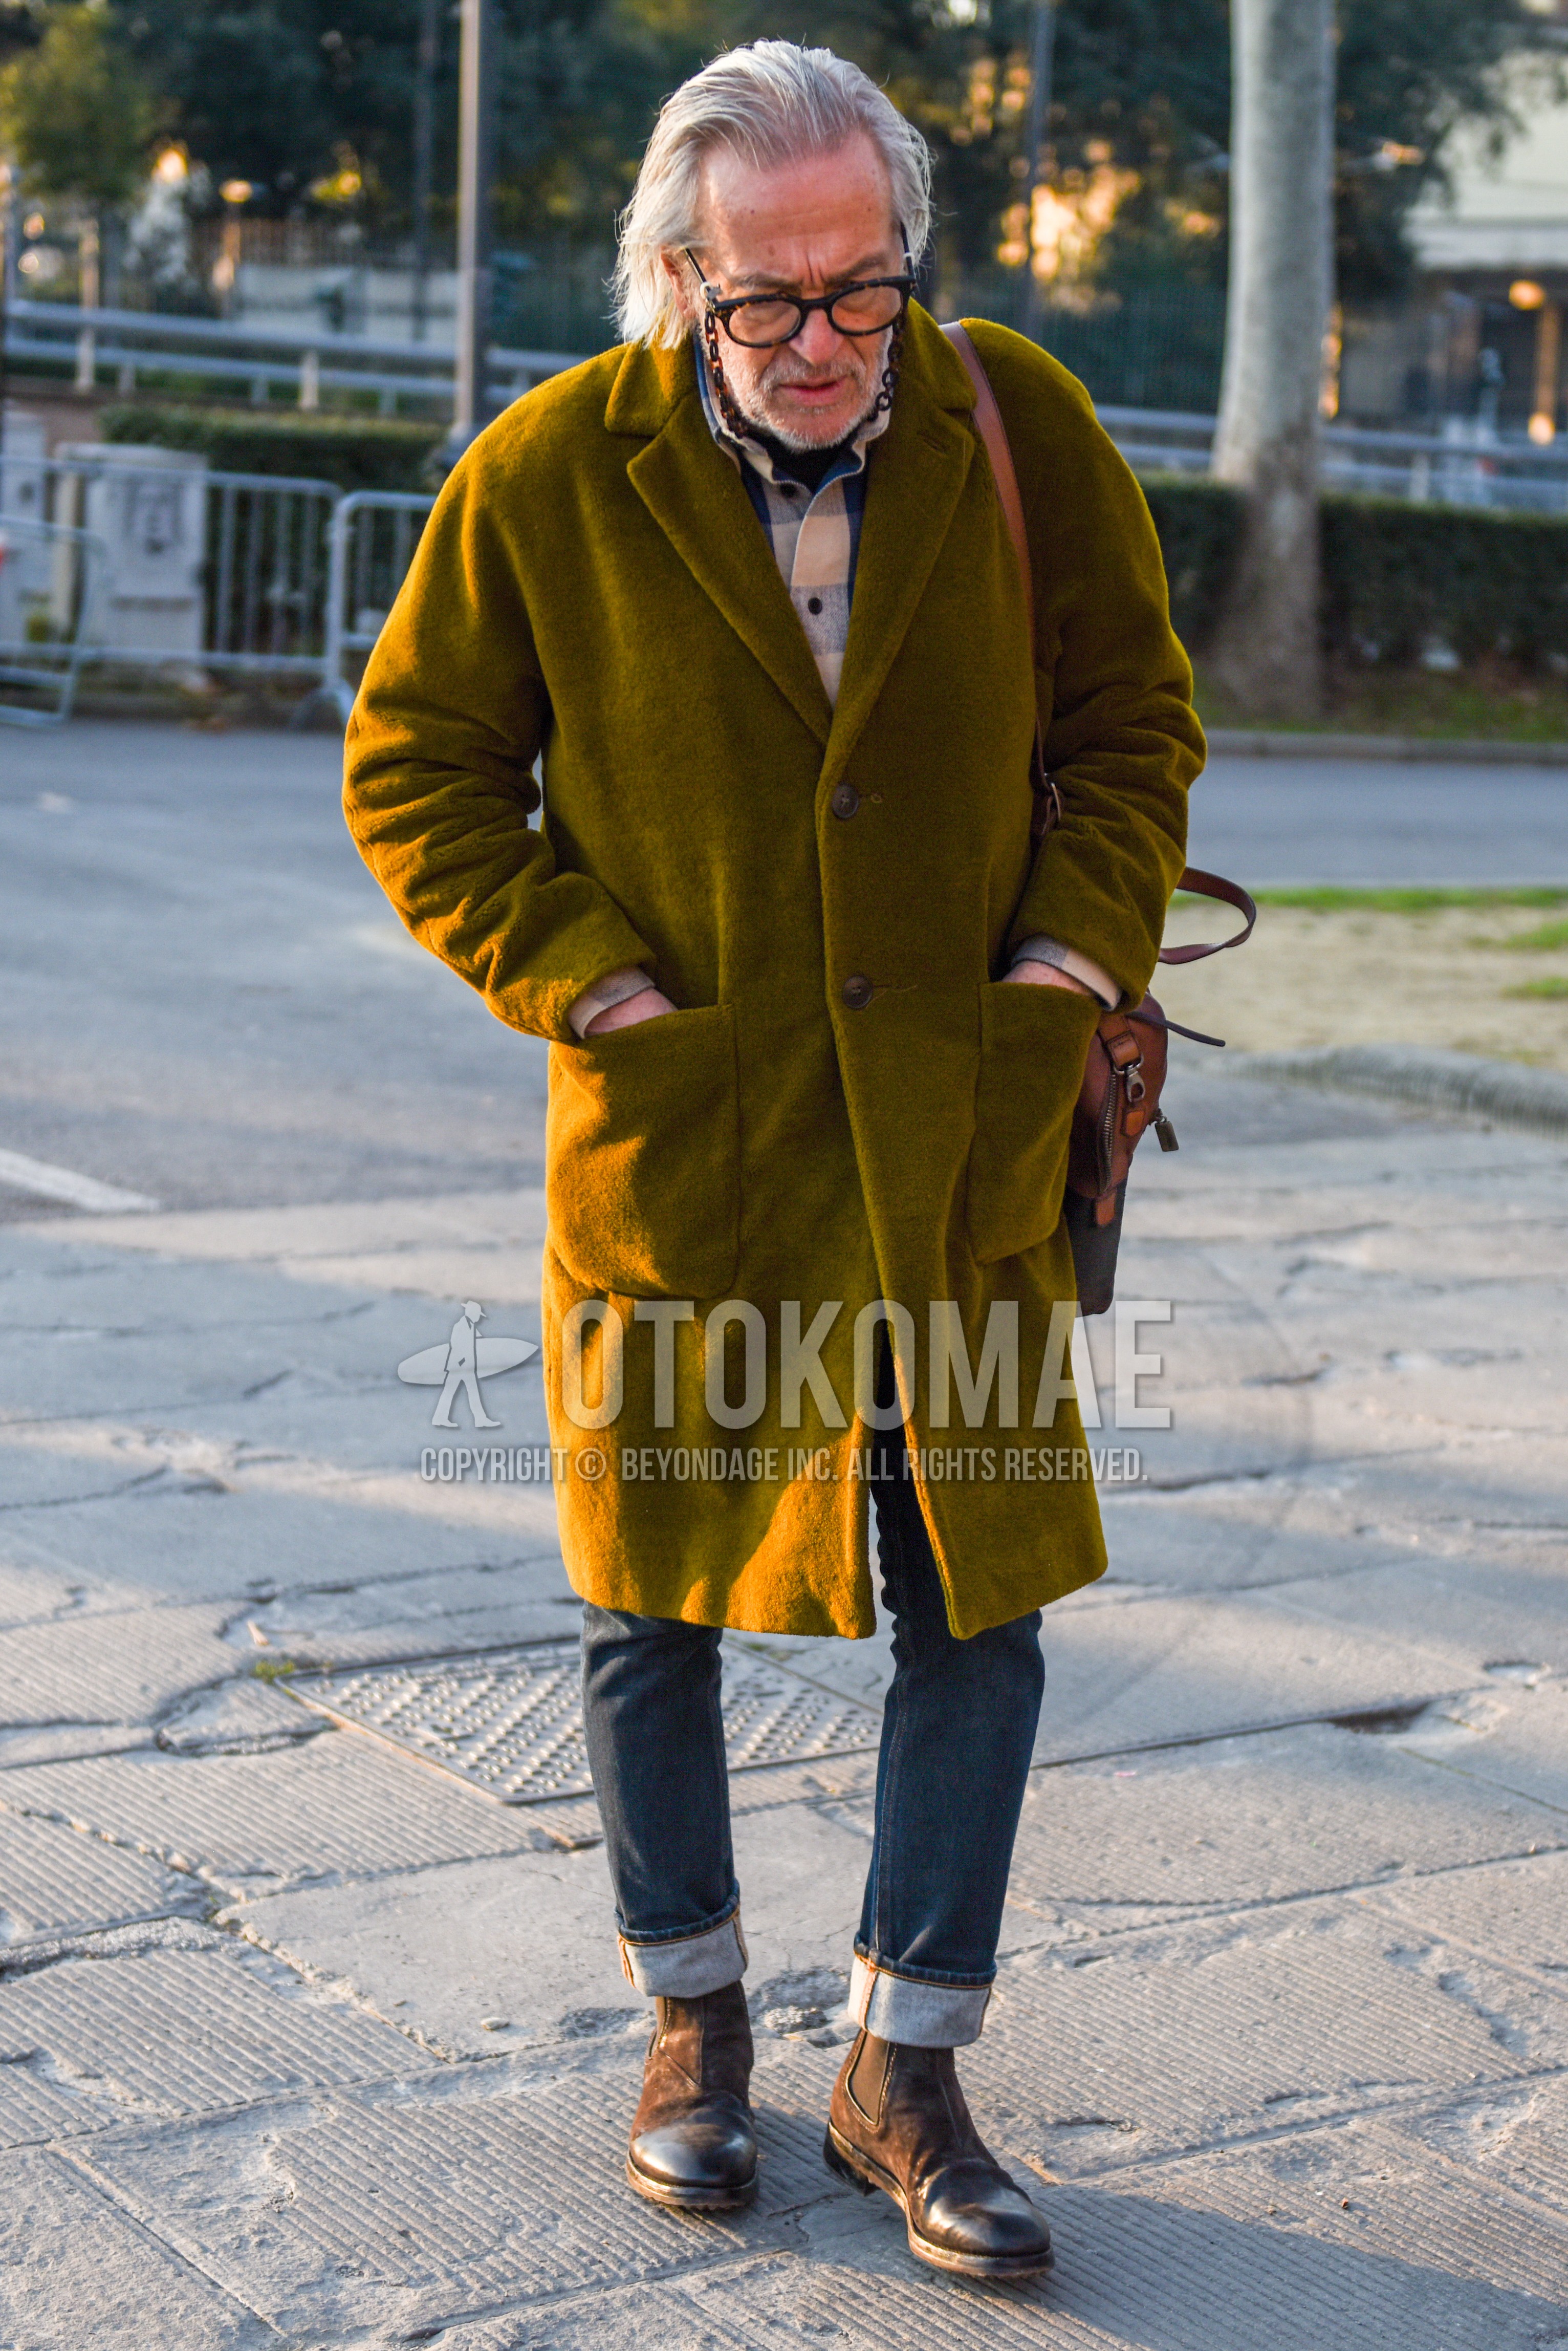 Men's autumn winter outfit with beige tortoiseshell glasses, olive green plain chester coat, multi-color check shirt, navy plain denim/jeans, brown side-gore boots.